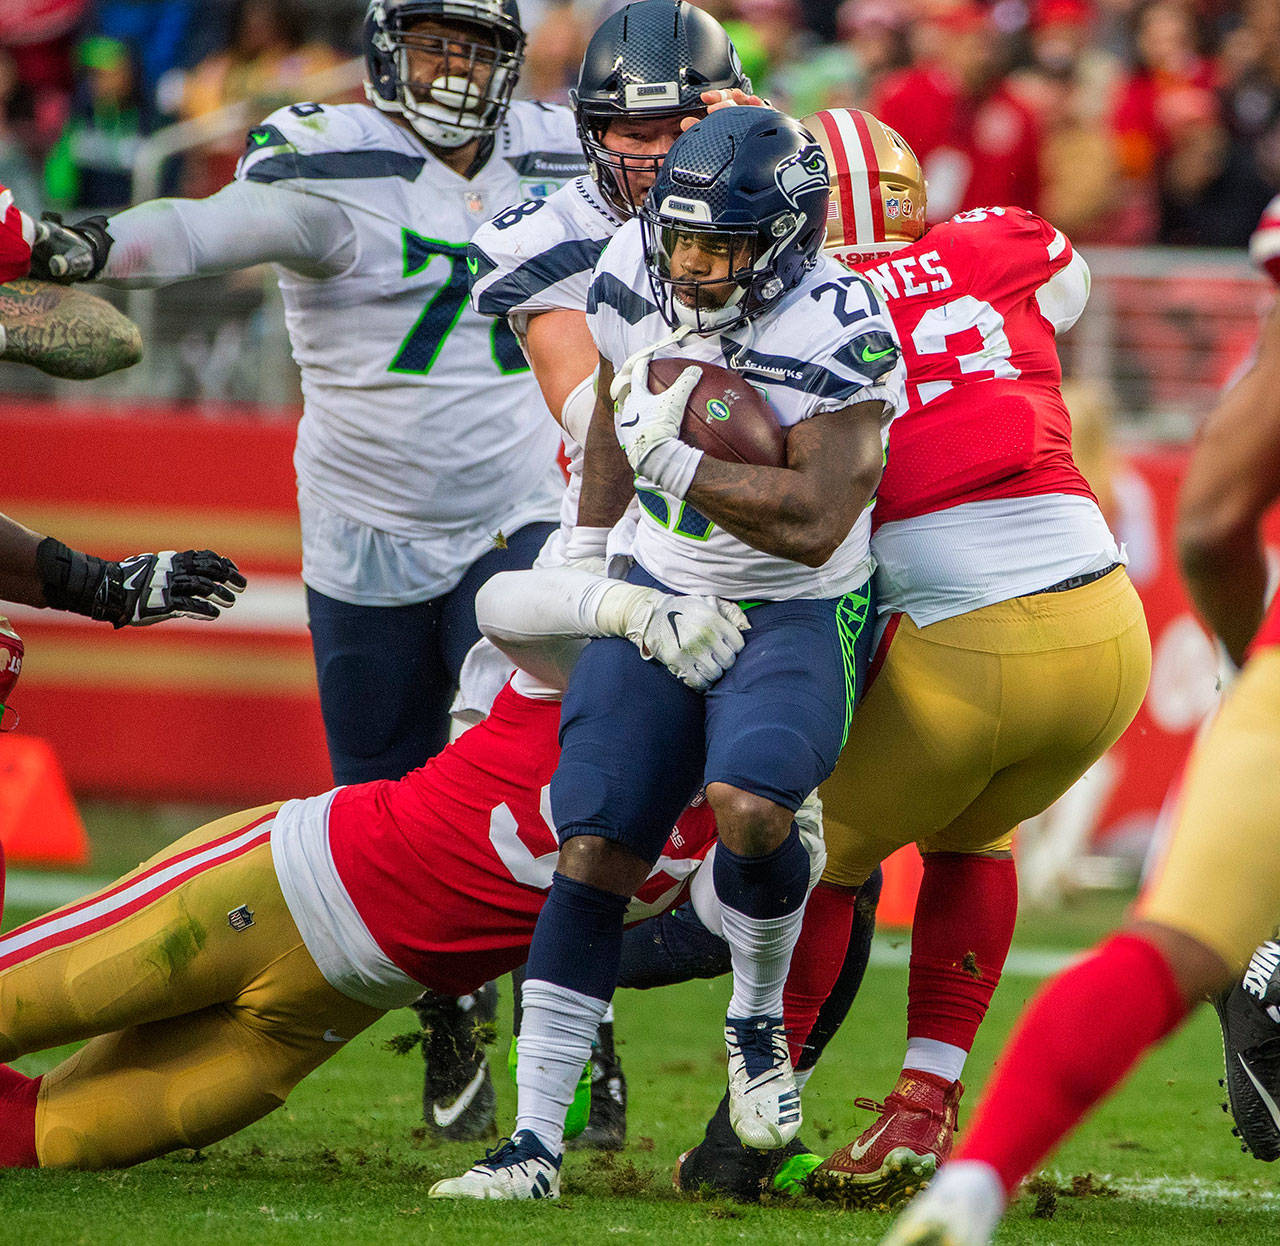 Seattle Seahawks running back Mike Davis (27) runs through a crowd of San Francisco 49ers defenders during second quarter action on Sunday, Dec. 16, 2018 at Levi’s Stadium in Santa Clara, Calif. (Mike Siegel/Seattle Times/TNS)